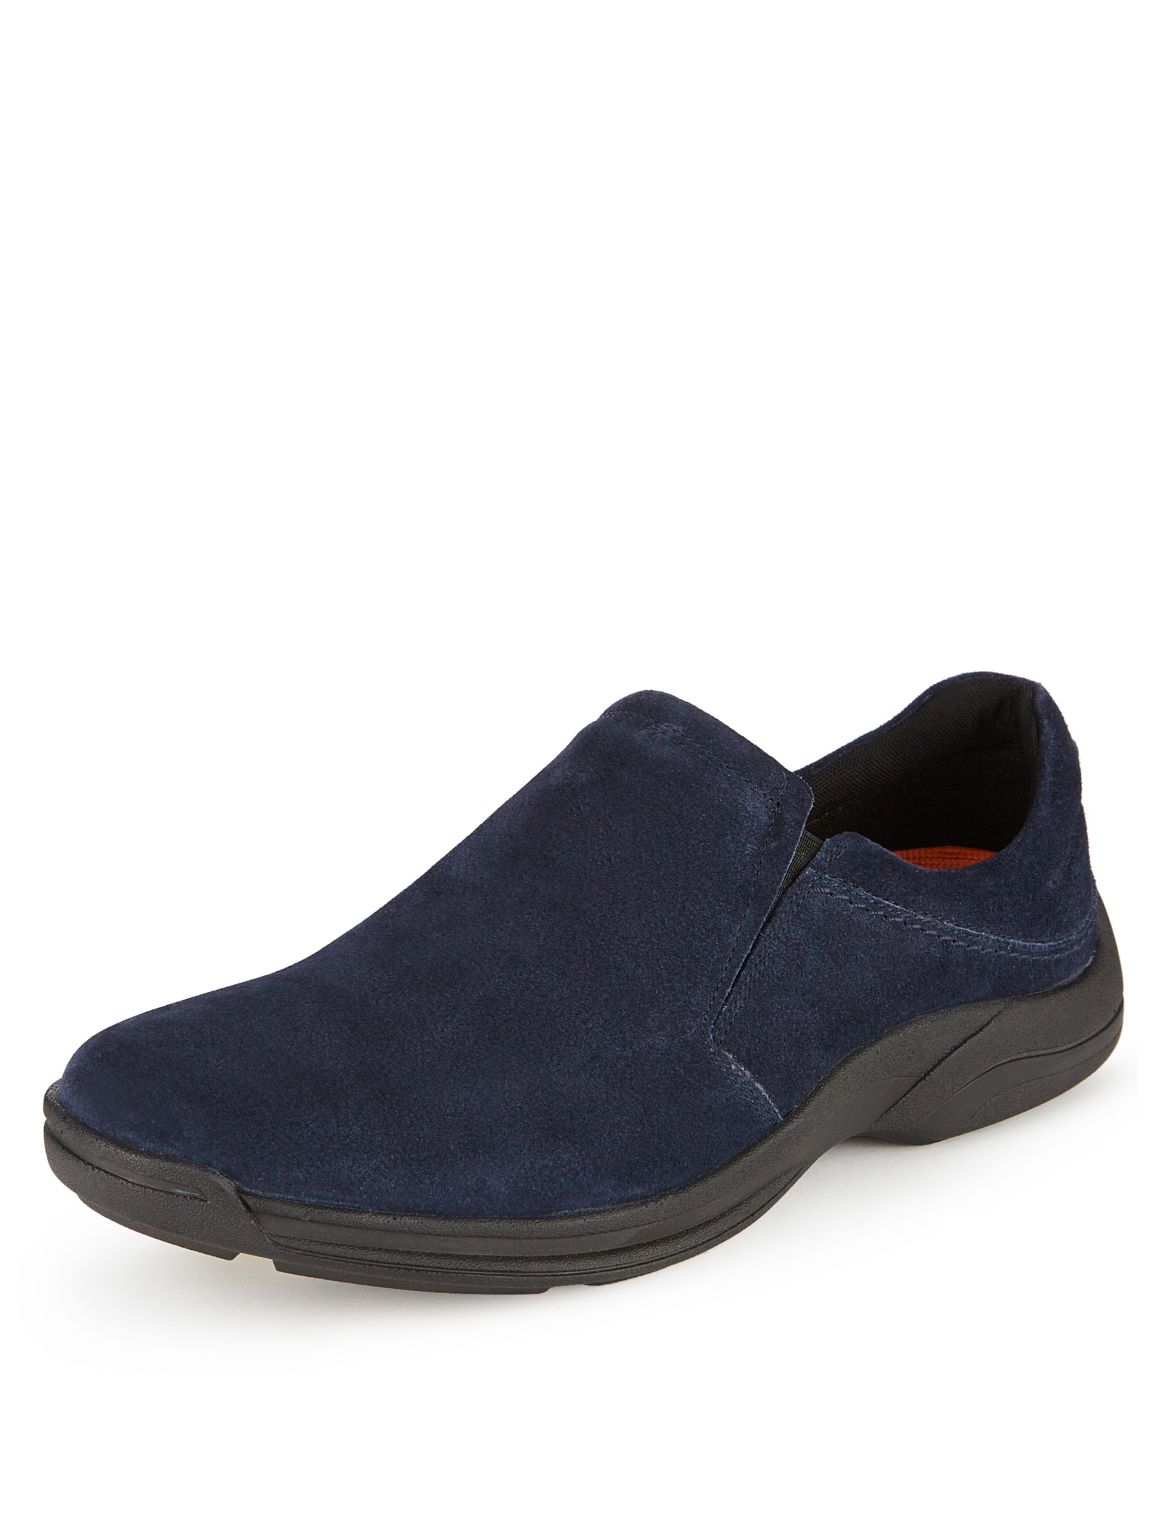 Airflexâ ¢ Suede Extra Wide Fit Slip-on Shoes Navy | Eizzy